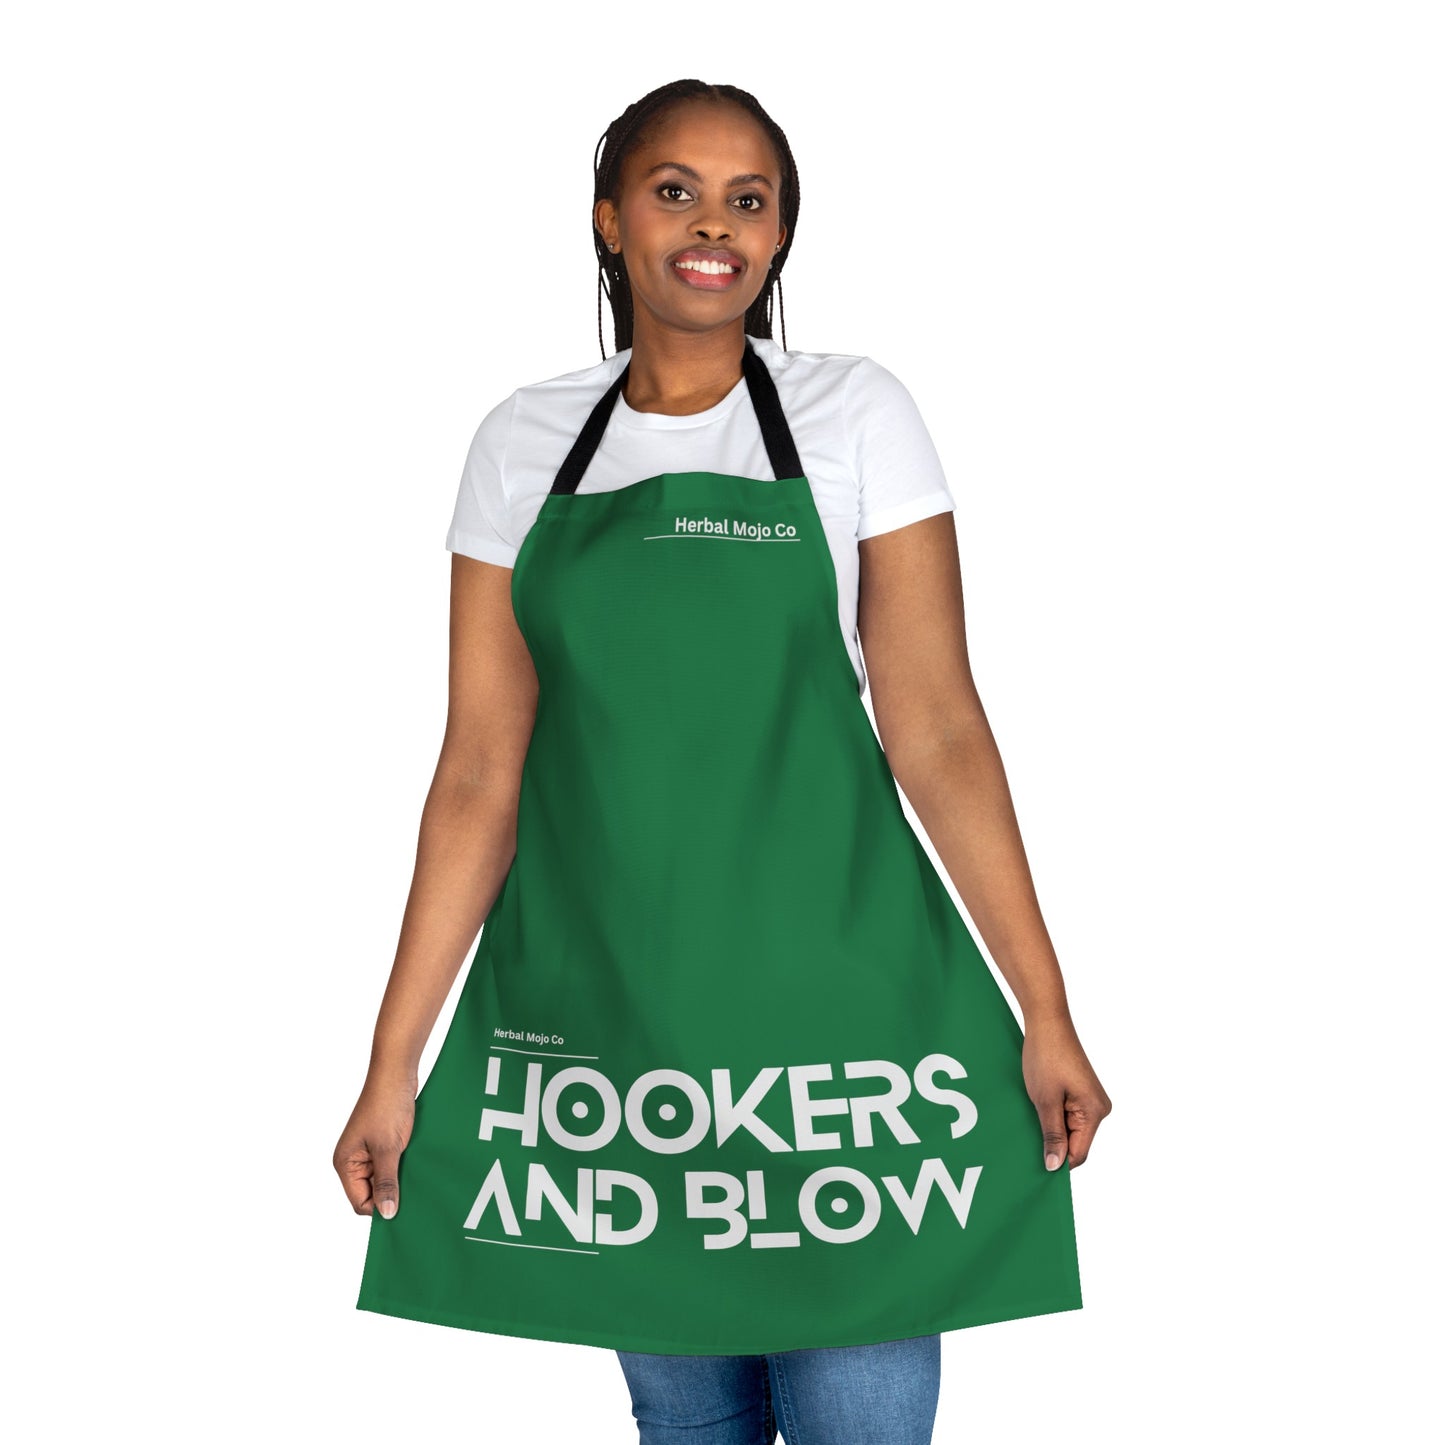 The Stamina for Men Hookers and Blow BBQ apron frontal shot as worn by a woman